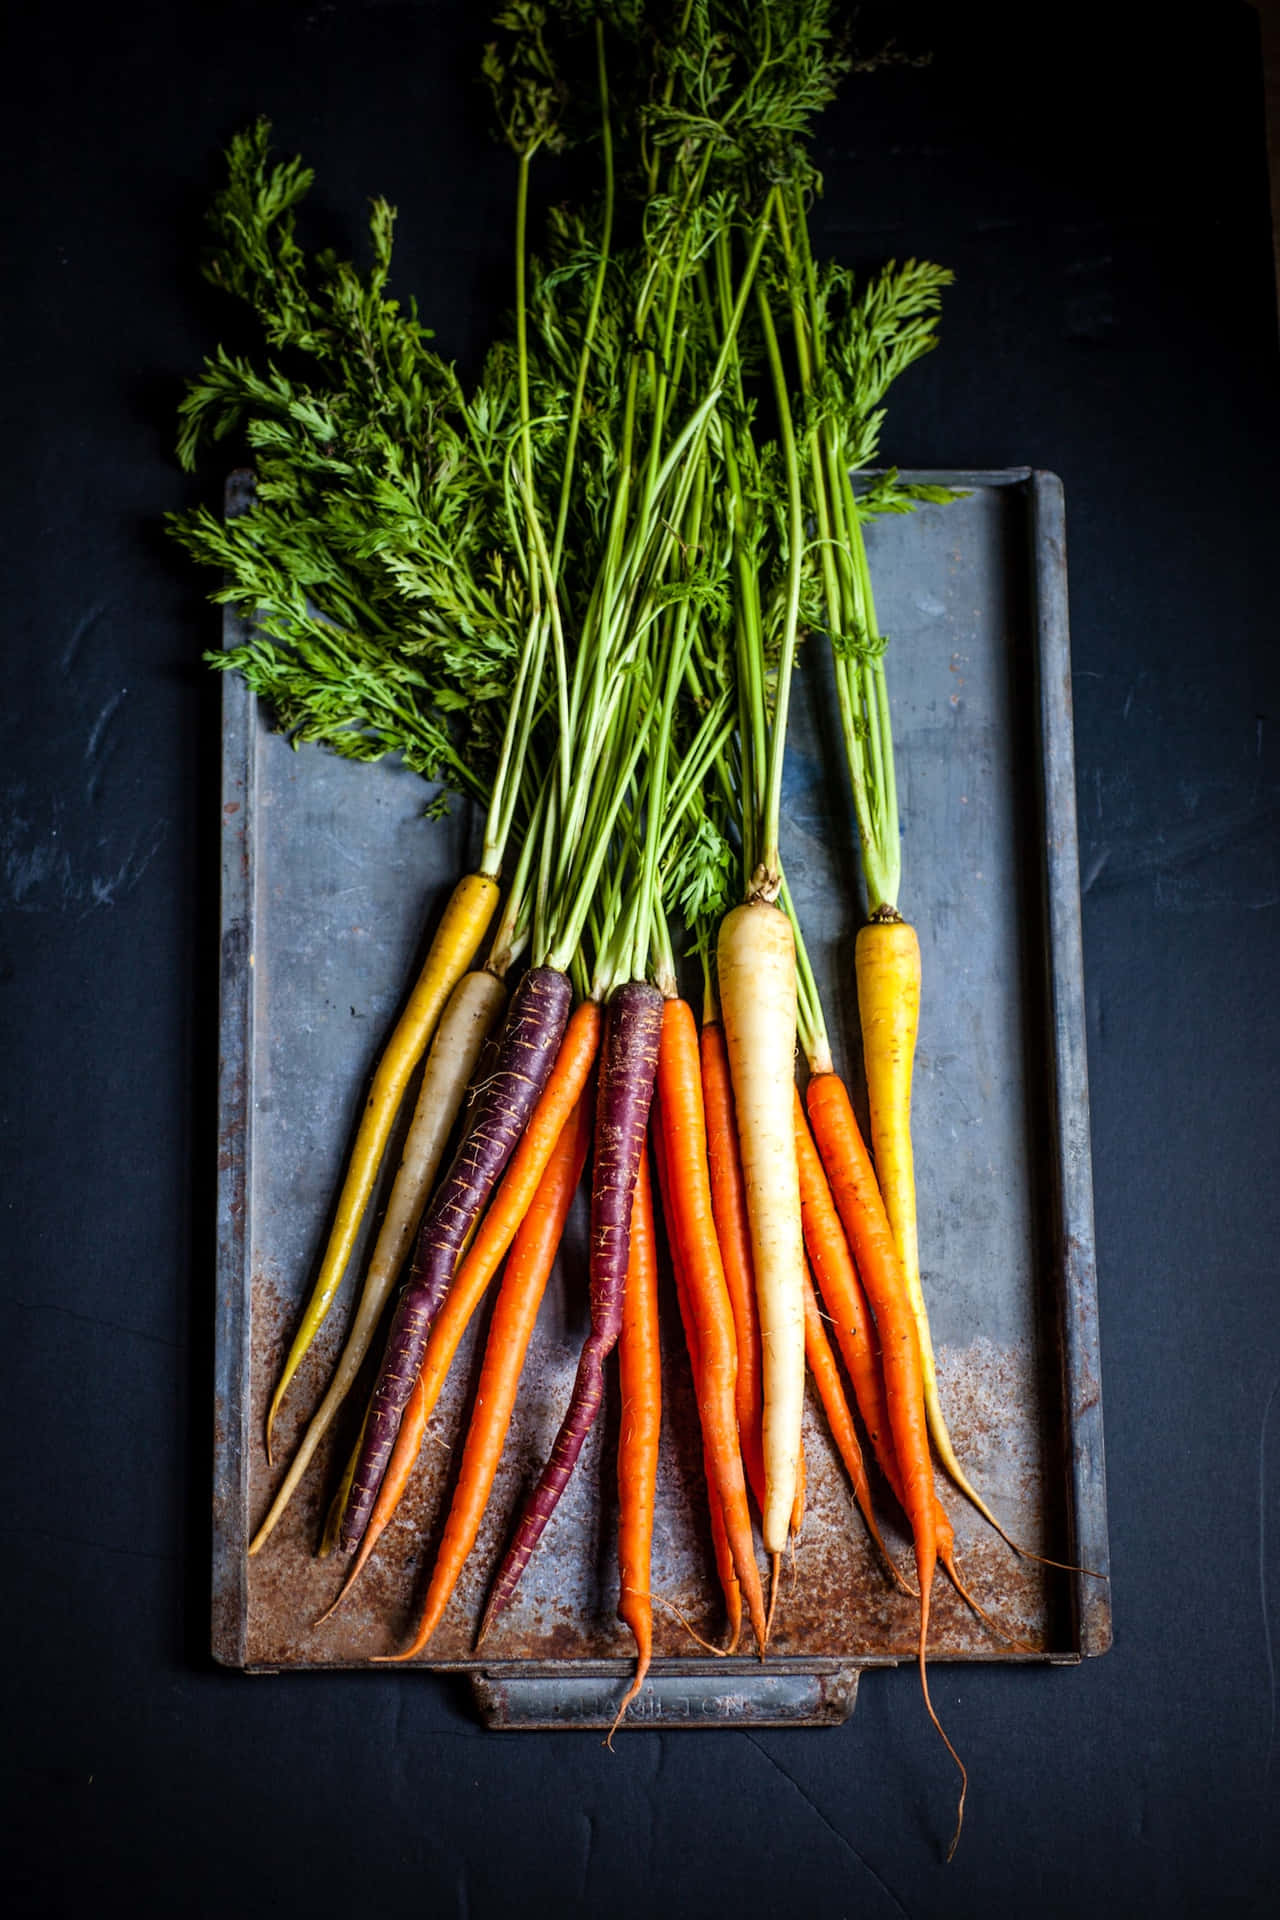 Carrot And Radish Root Vegetables Wallpaper